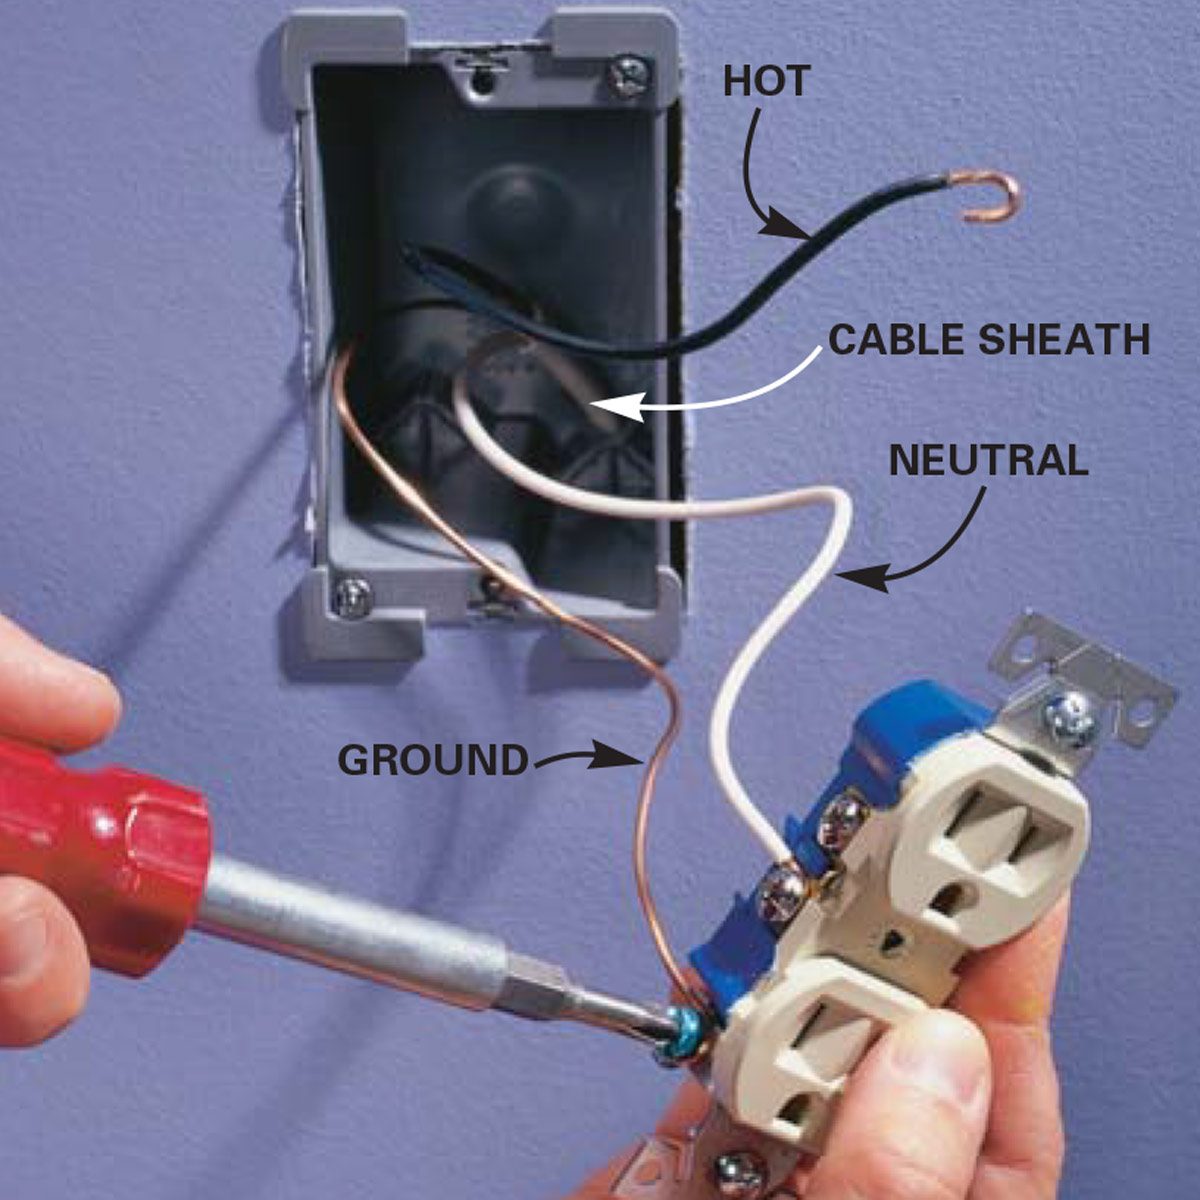 How To Wire An Outlet And Add An Electrical Outlet Diy Family Handyman